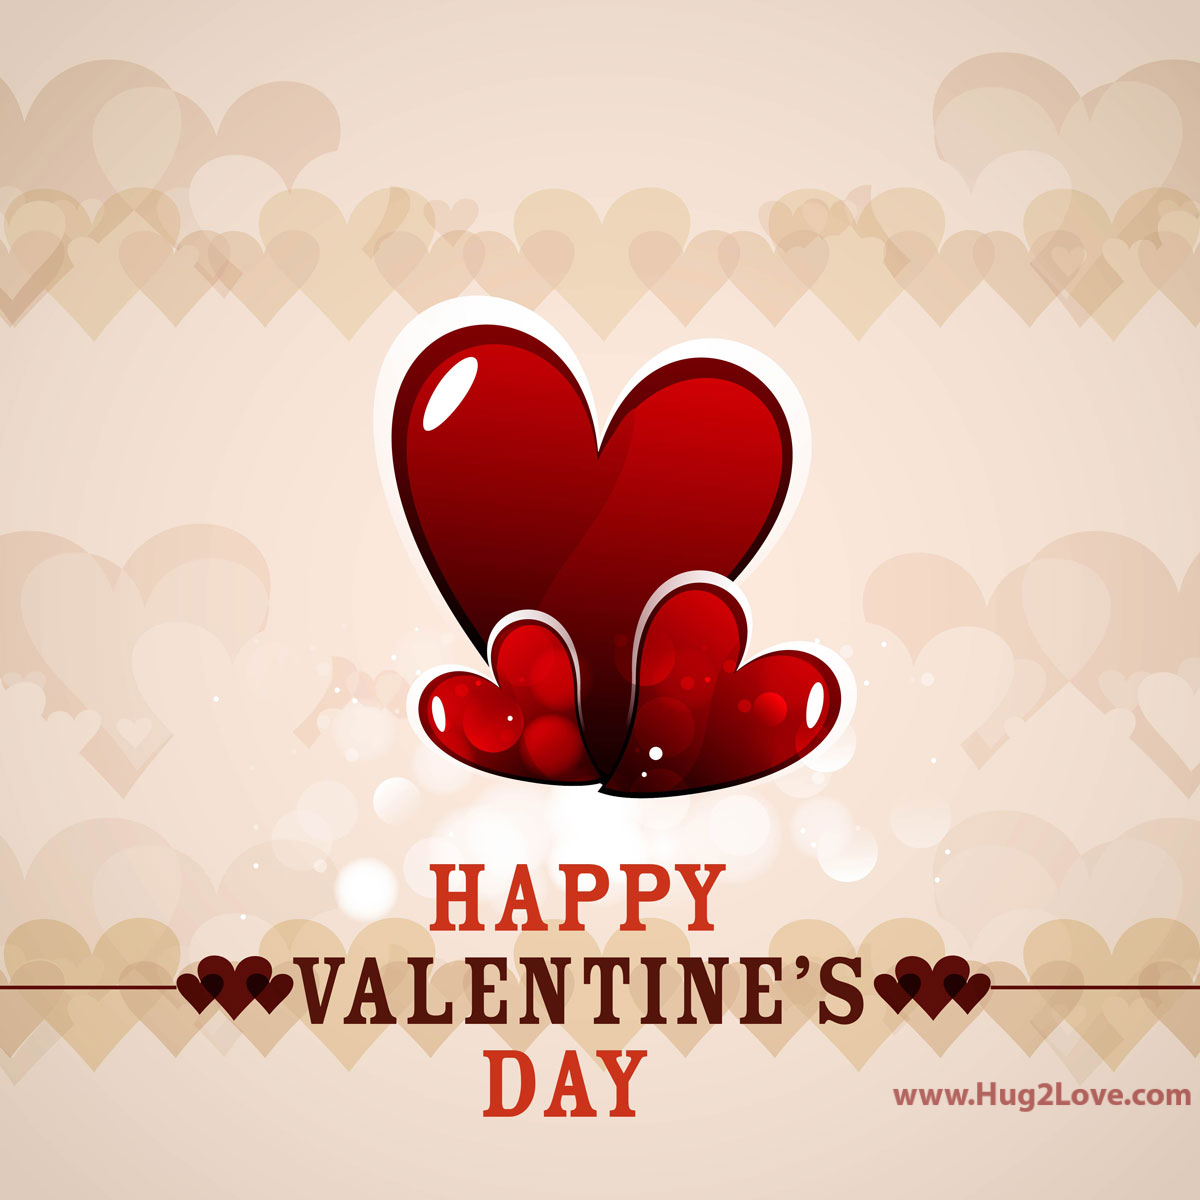 100 Happy Valentines Day Images Wallpapers 2020